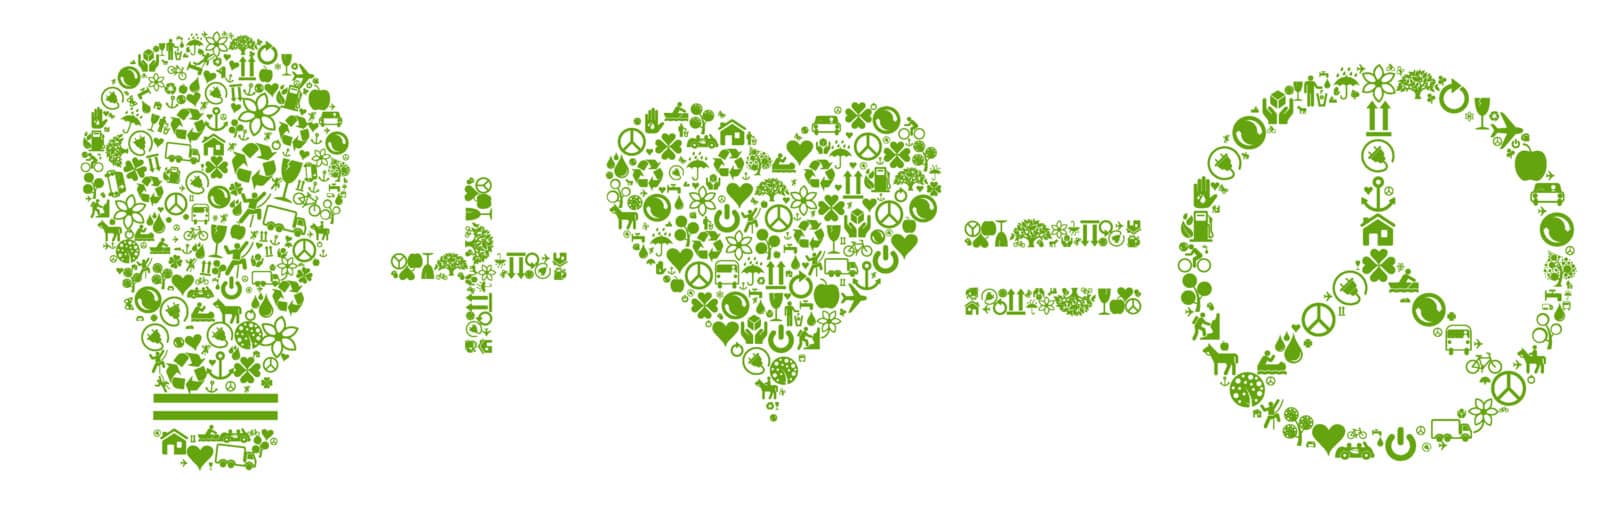 Ecology concept made of eco icons vector by krabata